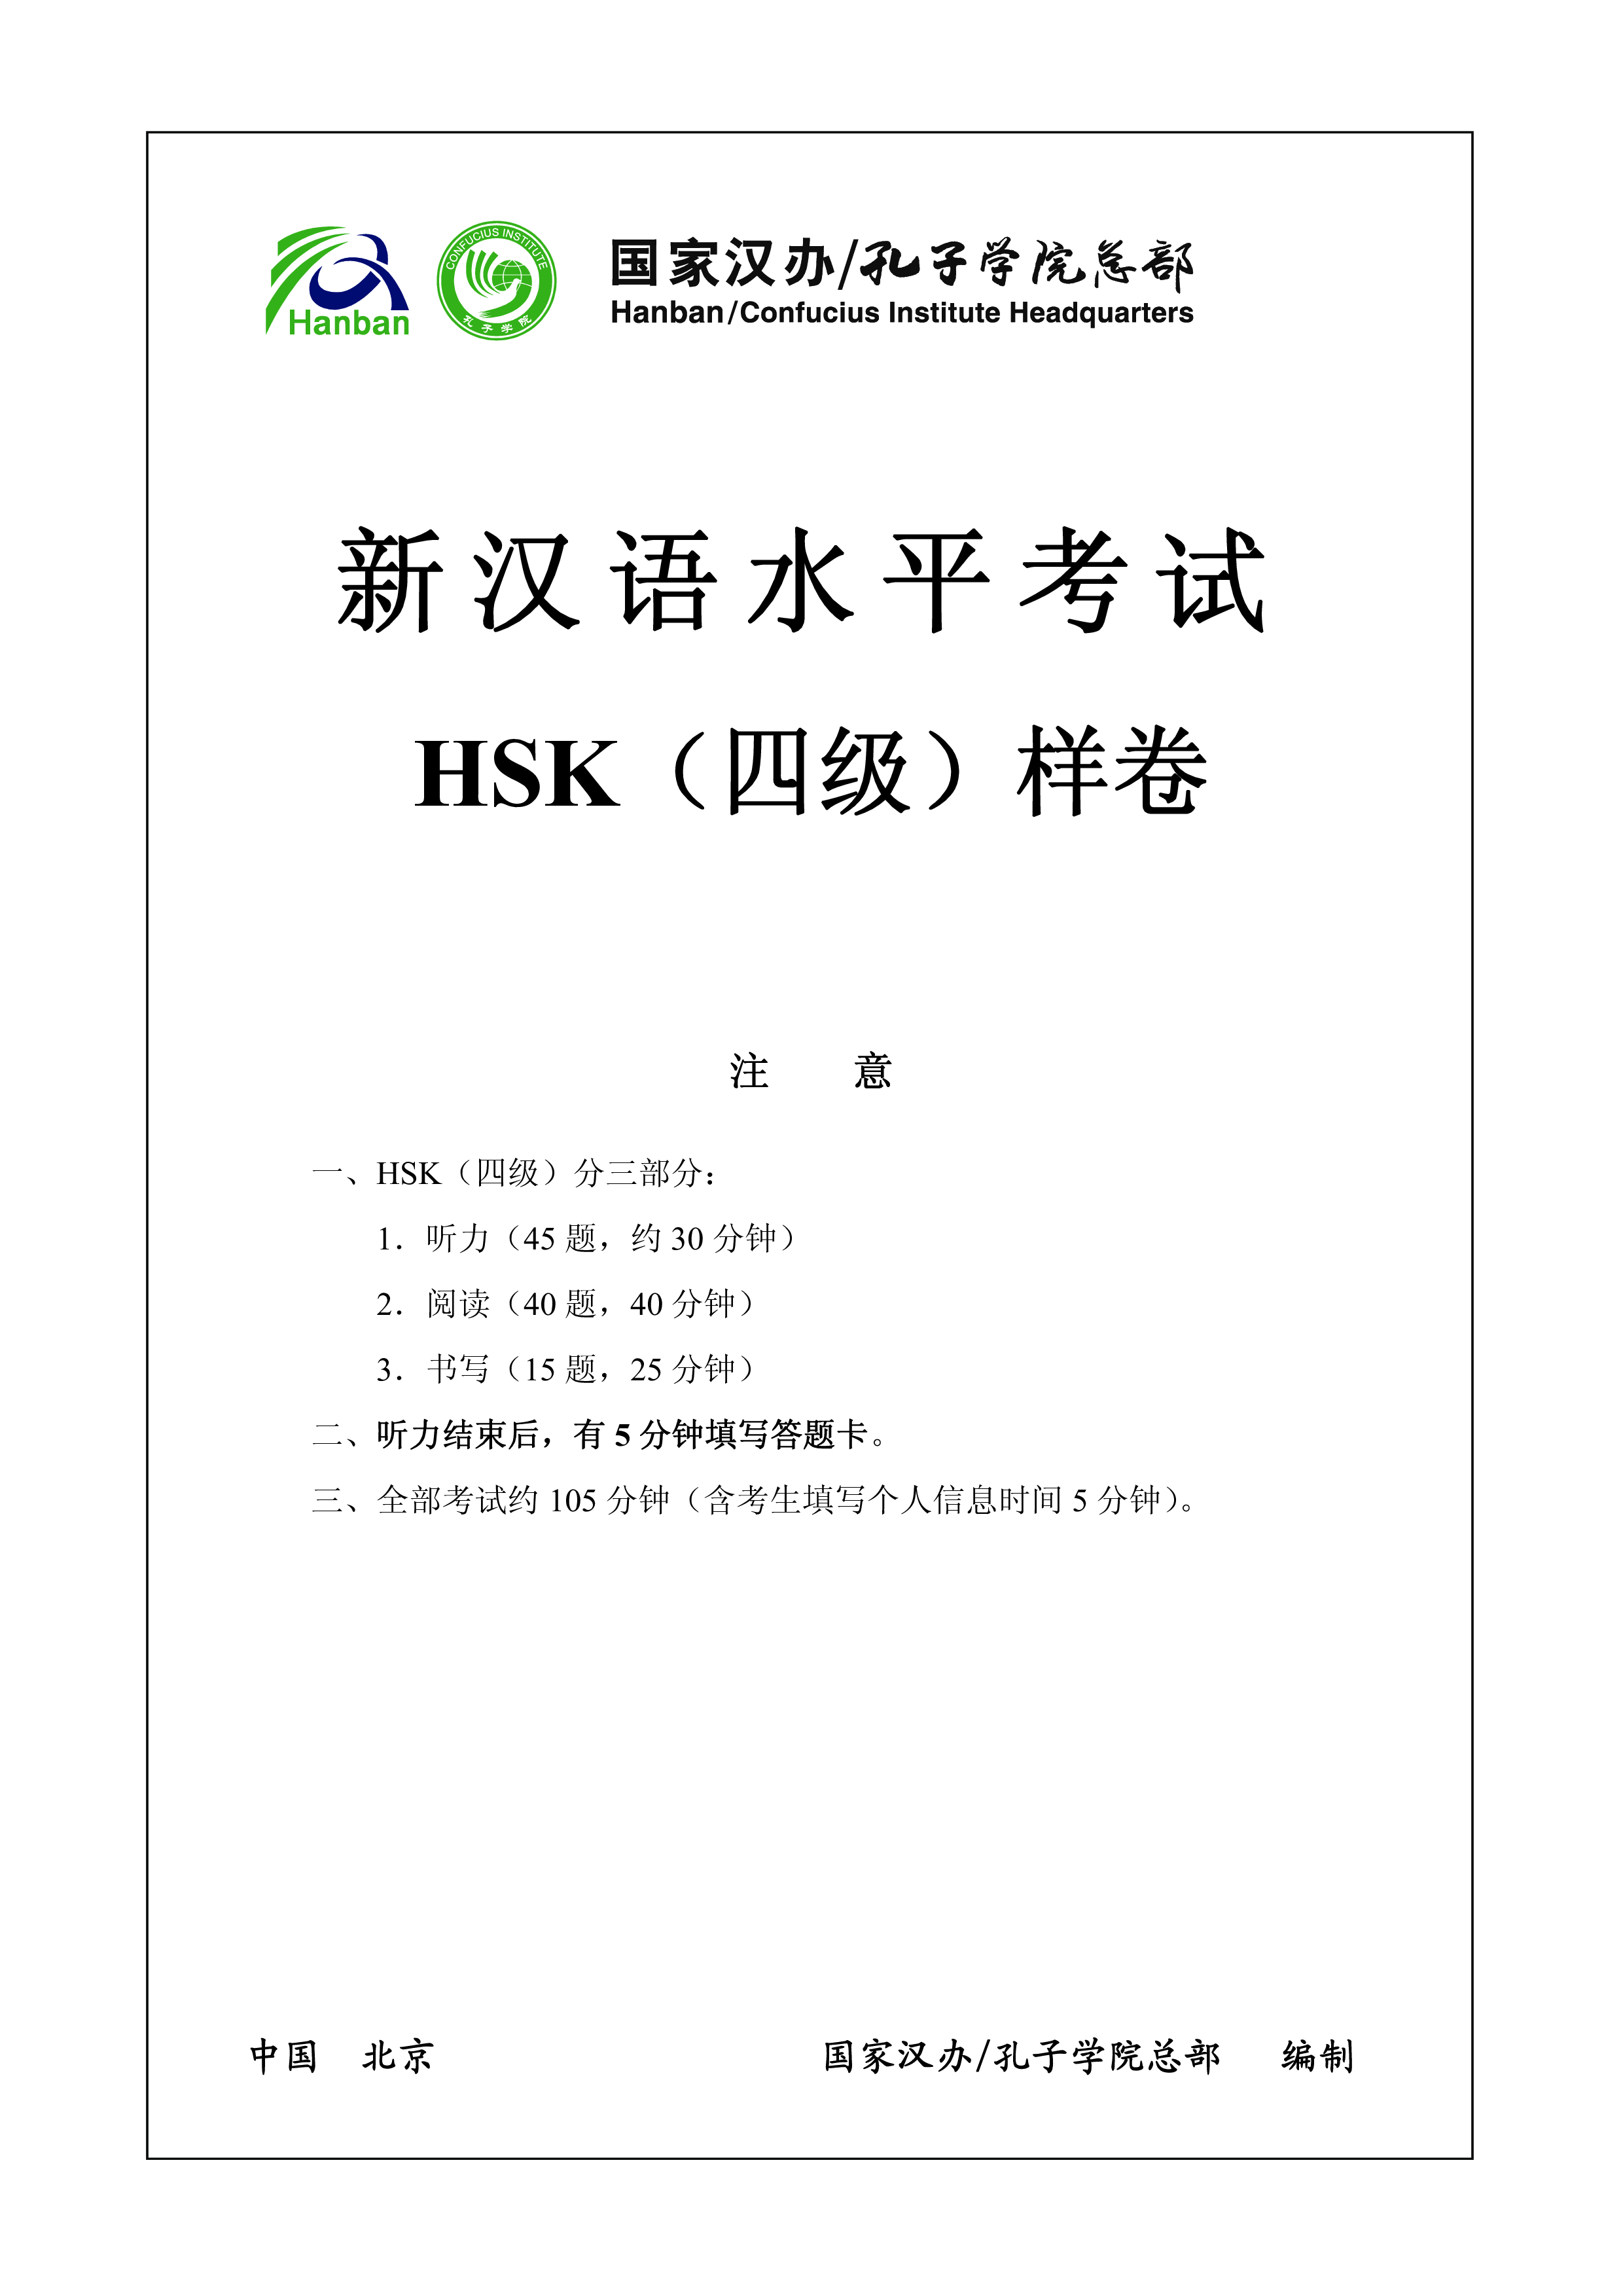 hsk4 chinese words test exam and answers example 2 plantilla imagen principal